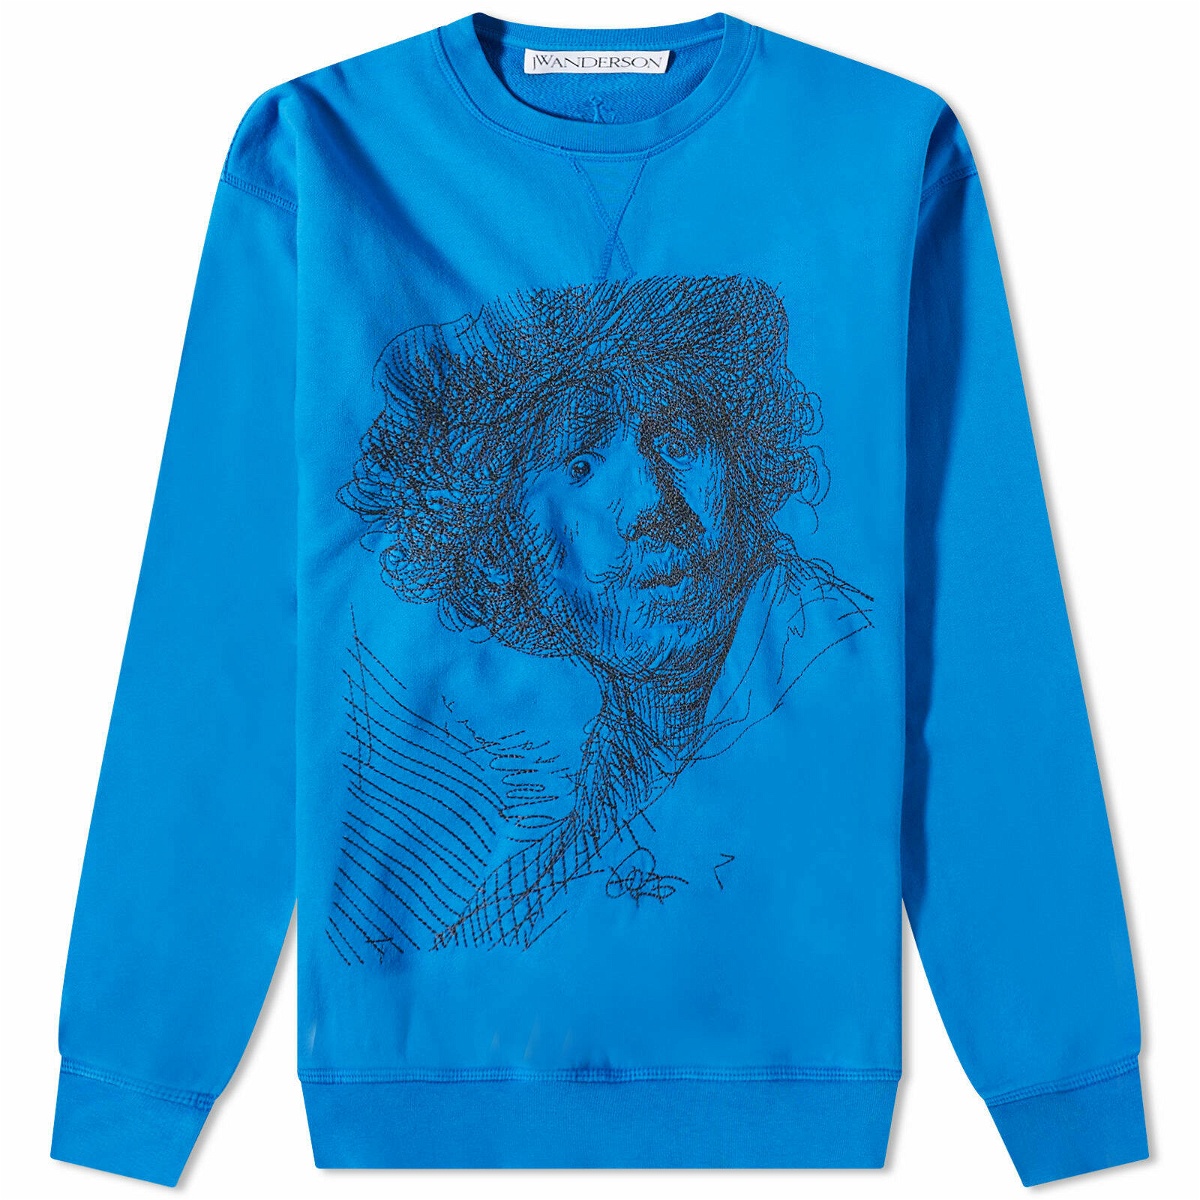 JW Anderson Men's Rembrandt Embroidered Sweat in Blue JW Anderson